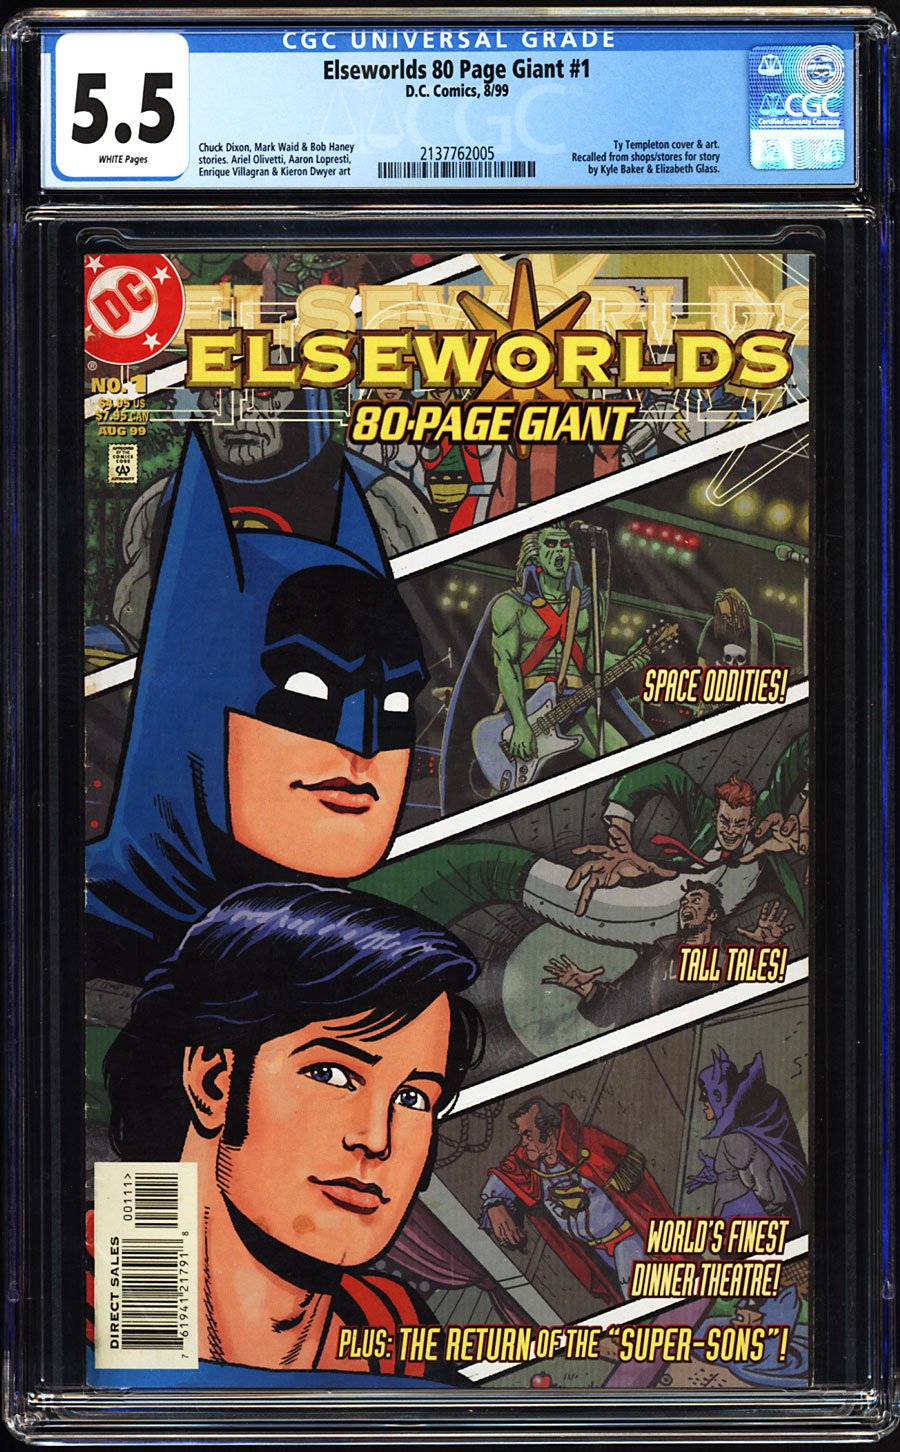 Elseworlds 80 page giant